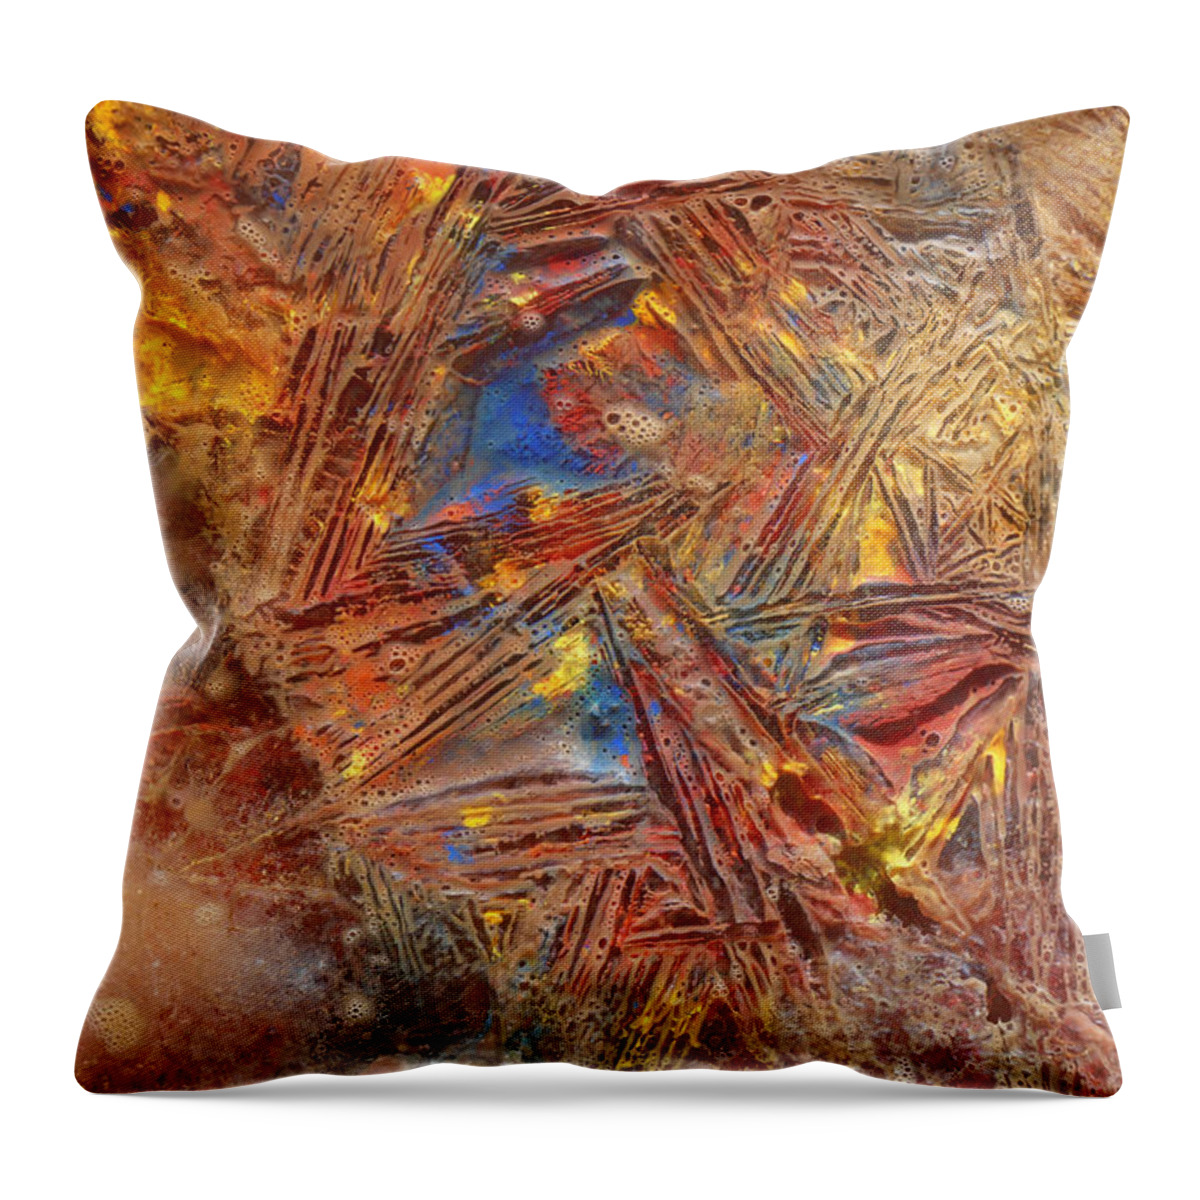 Ice Matrix Throw Pillow featuring the mixed media Ice Matrix - Icy Abstract 30 by Sami Tiainen